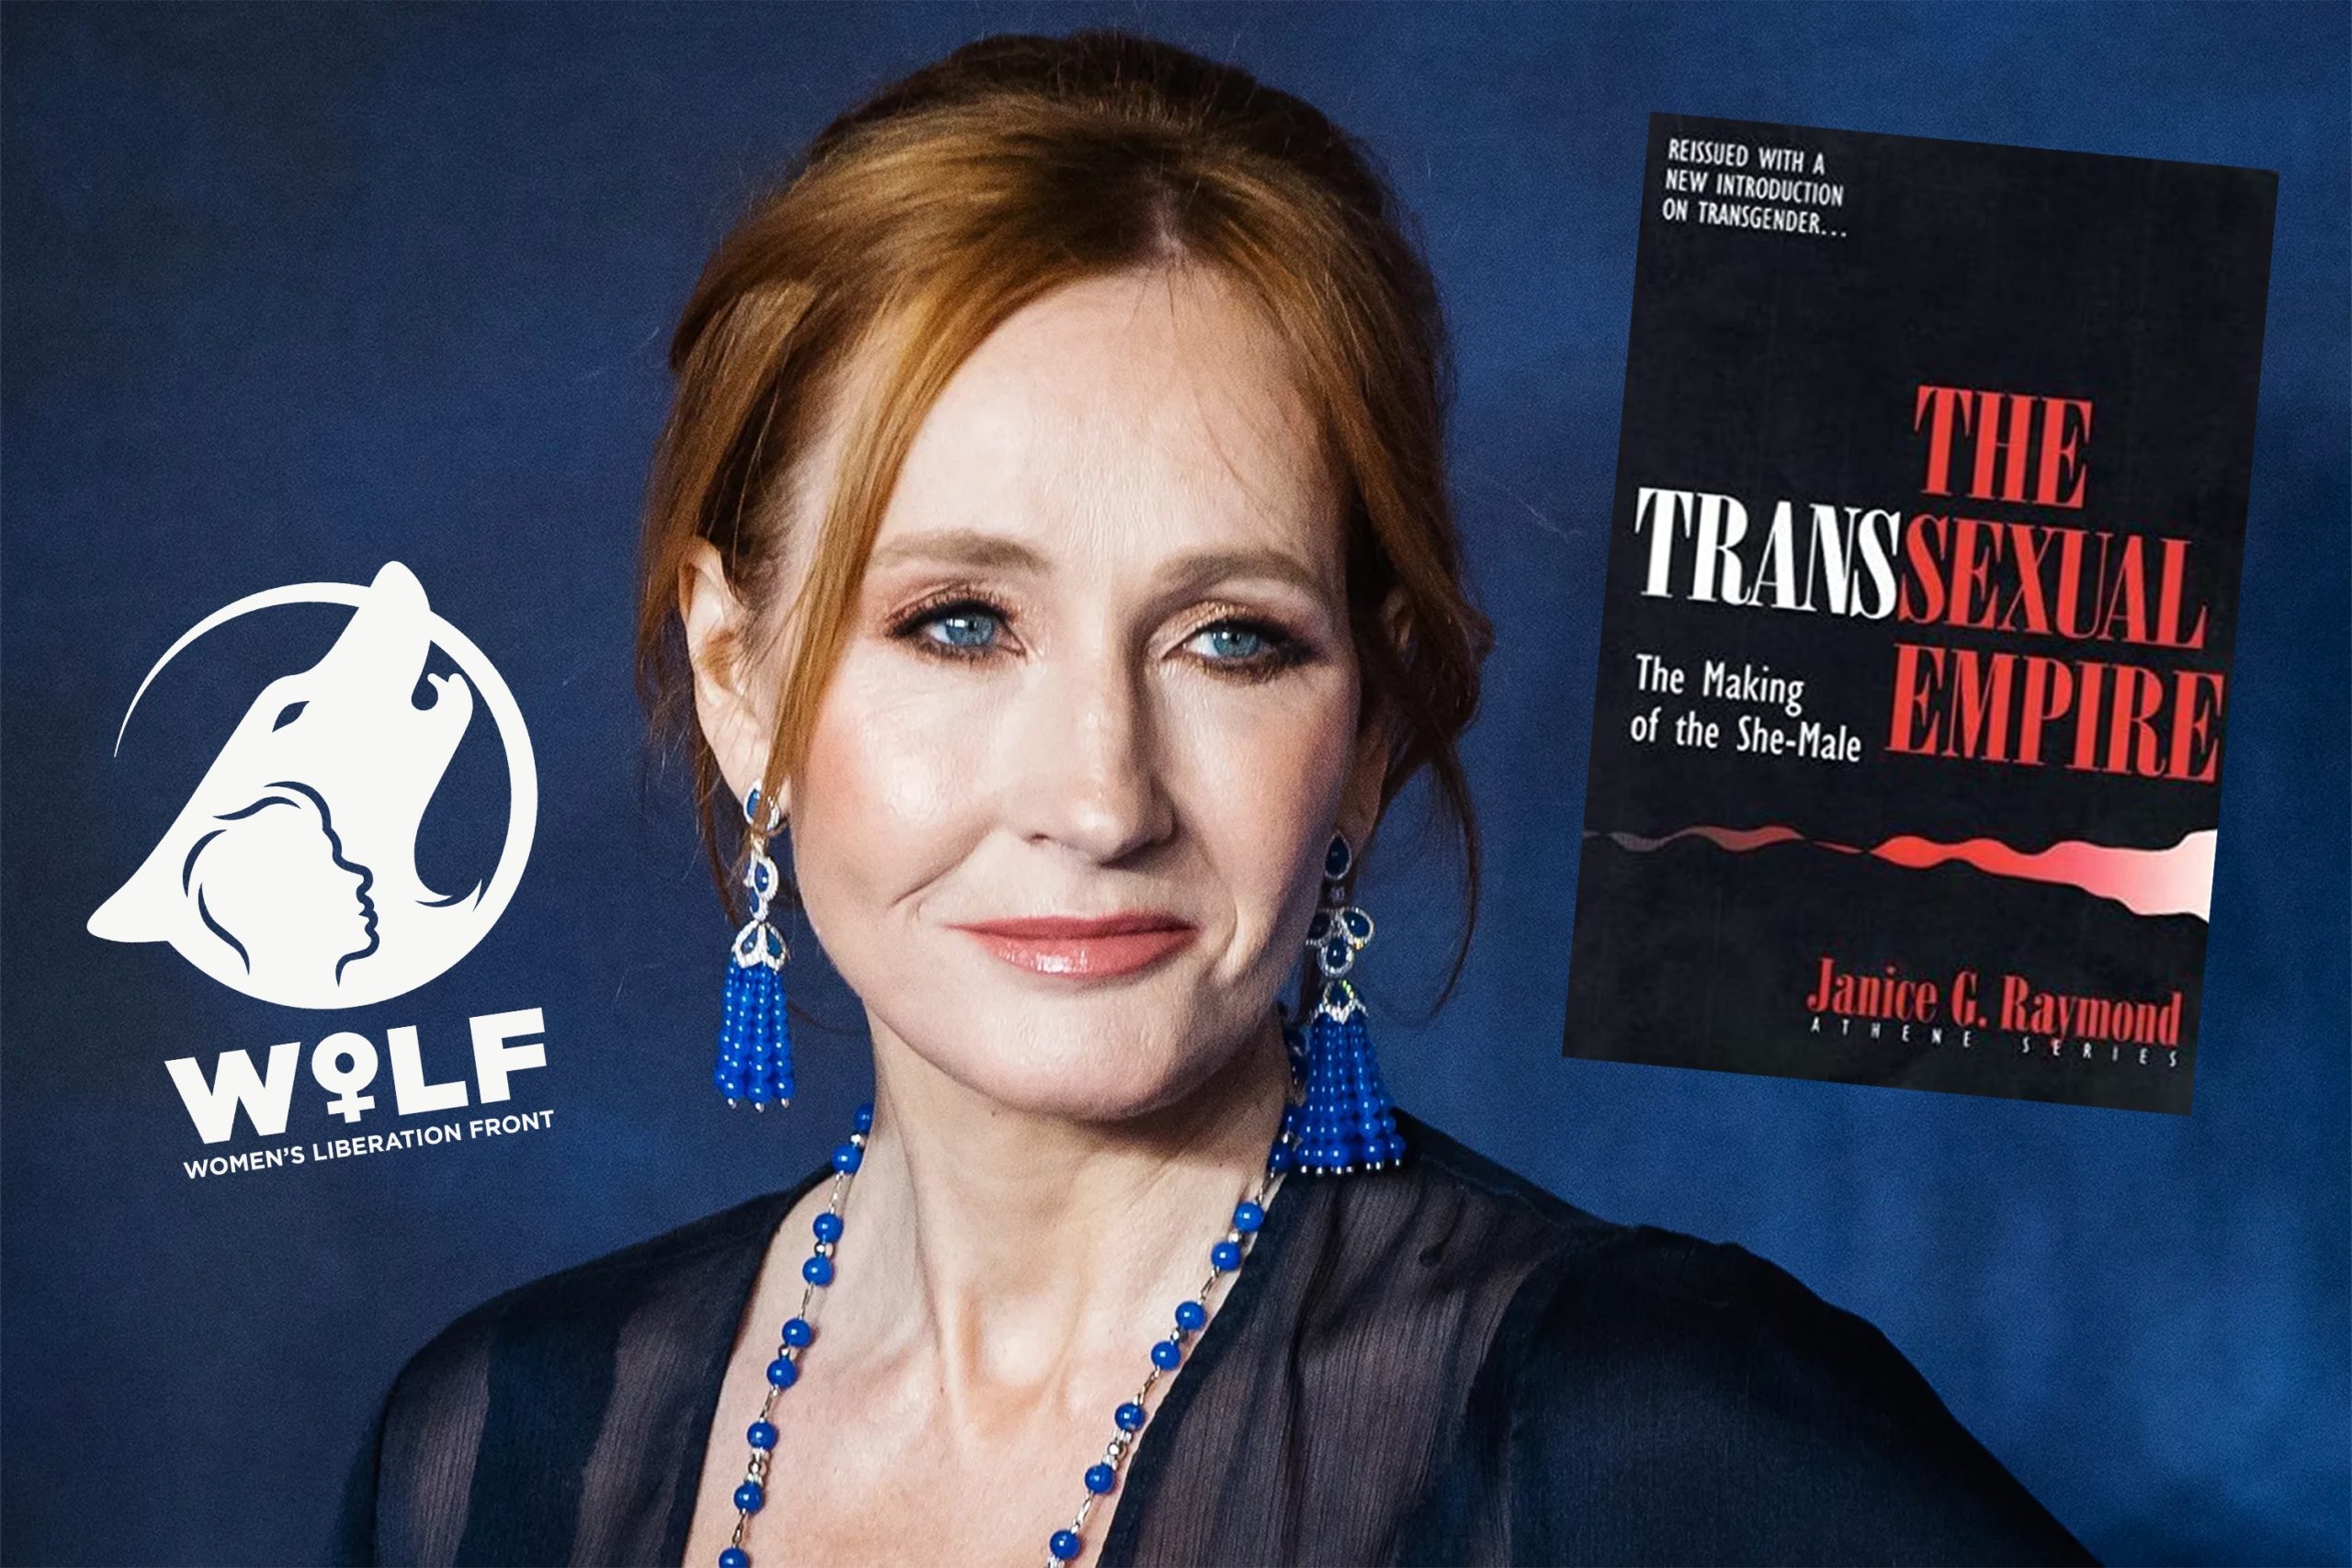 collage of JK Rowling, the transsexual empire cover, and the Women's Liberation Front (WoLF) logo